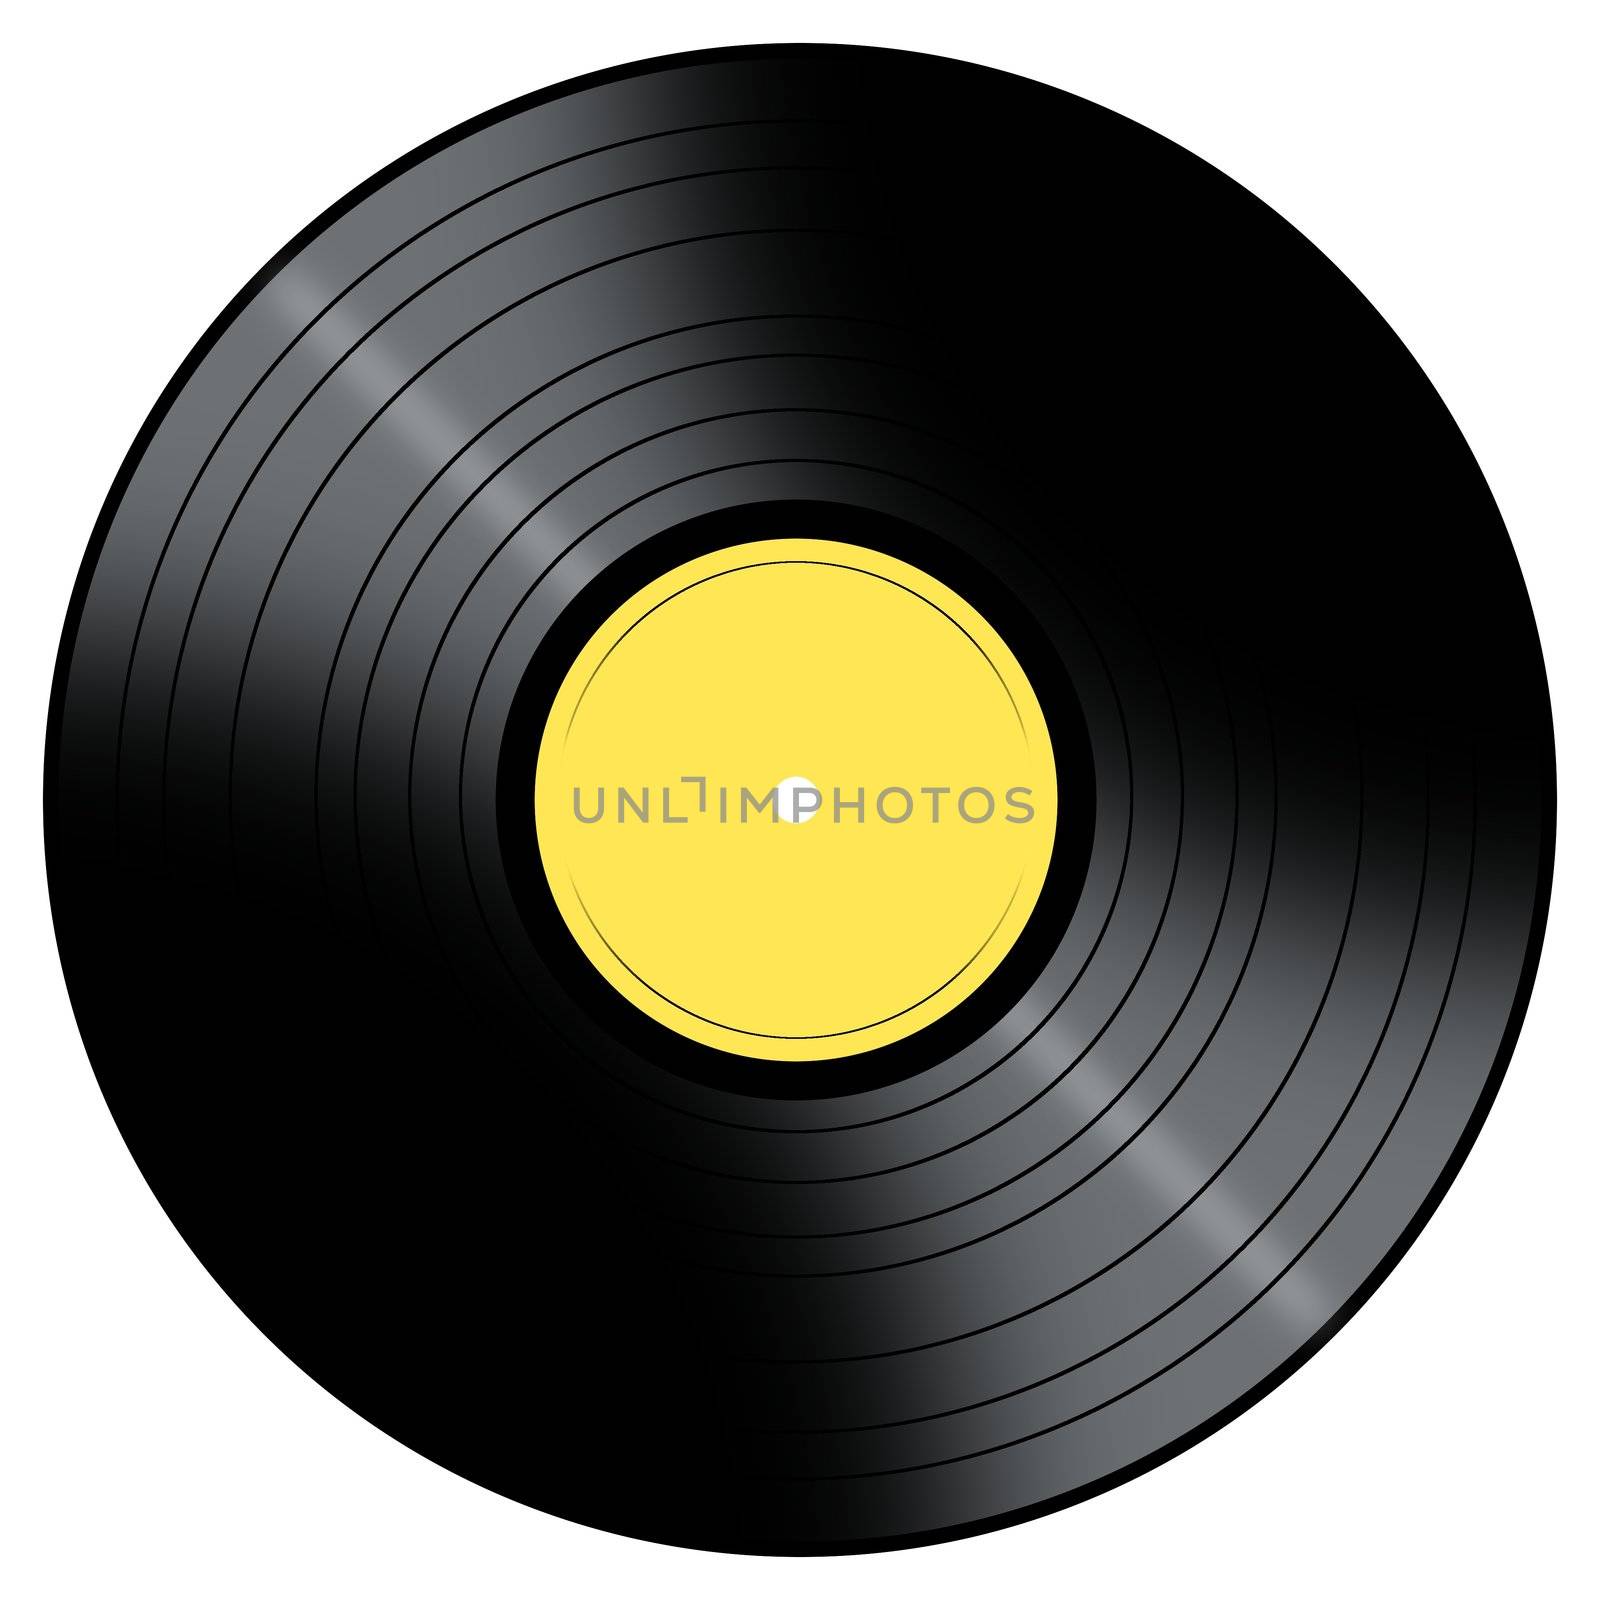 Vinyl Record with a color center on a white background.